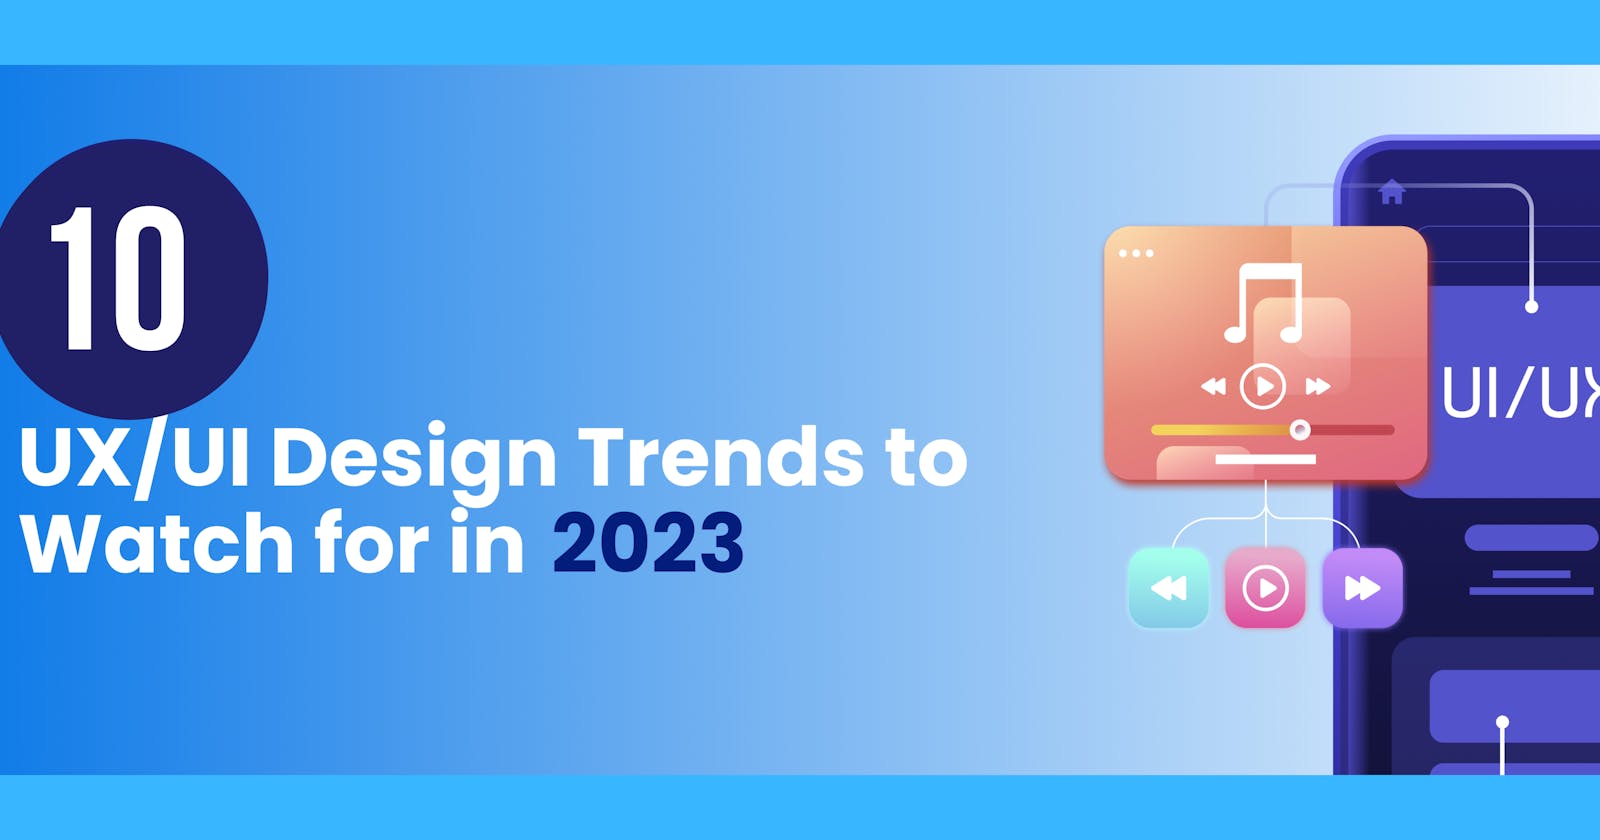 Here are 10 UI/UX design trends to look out for in 2023